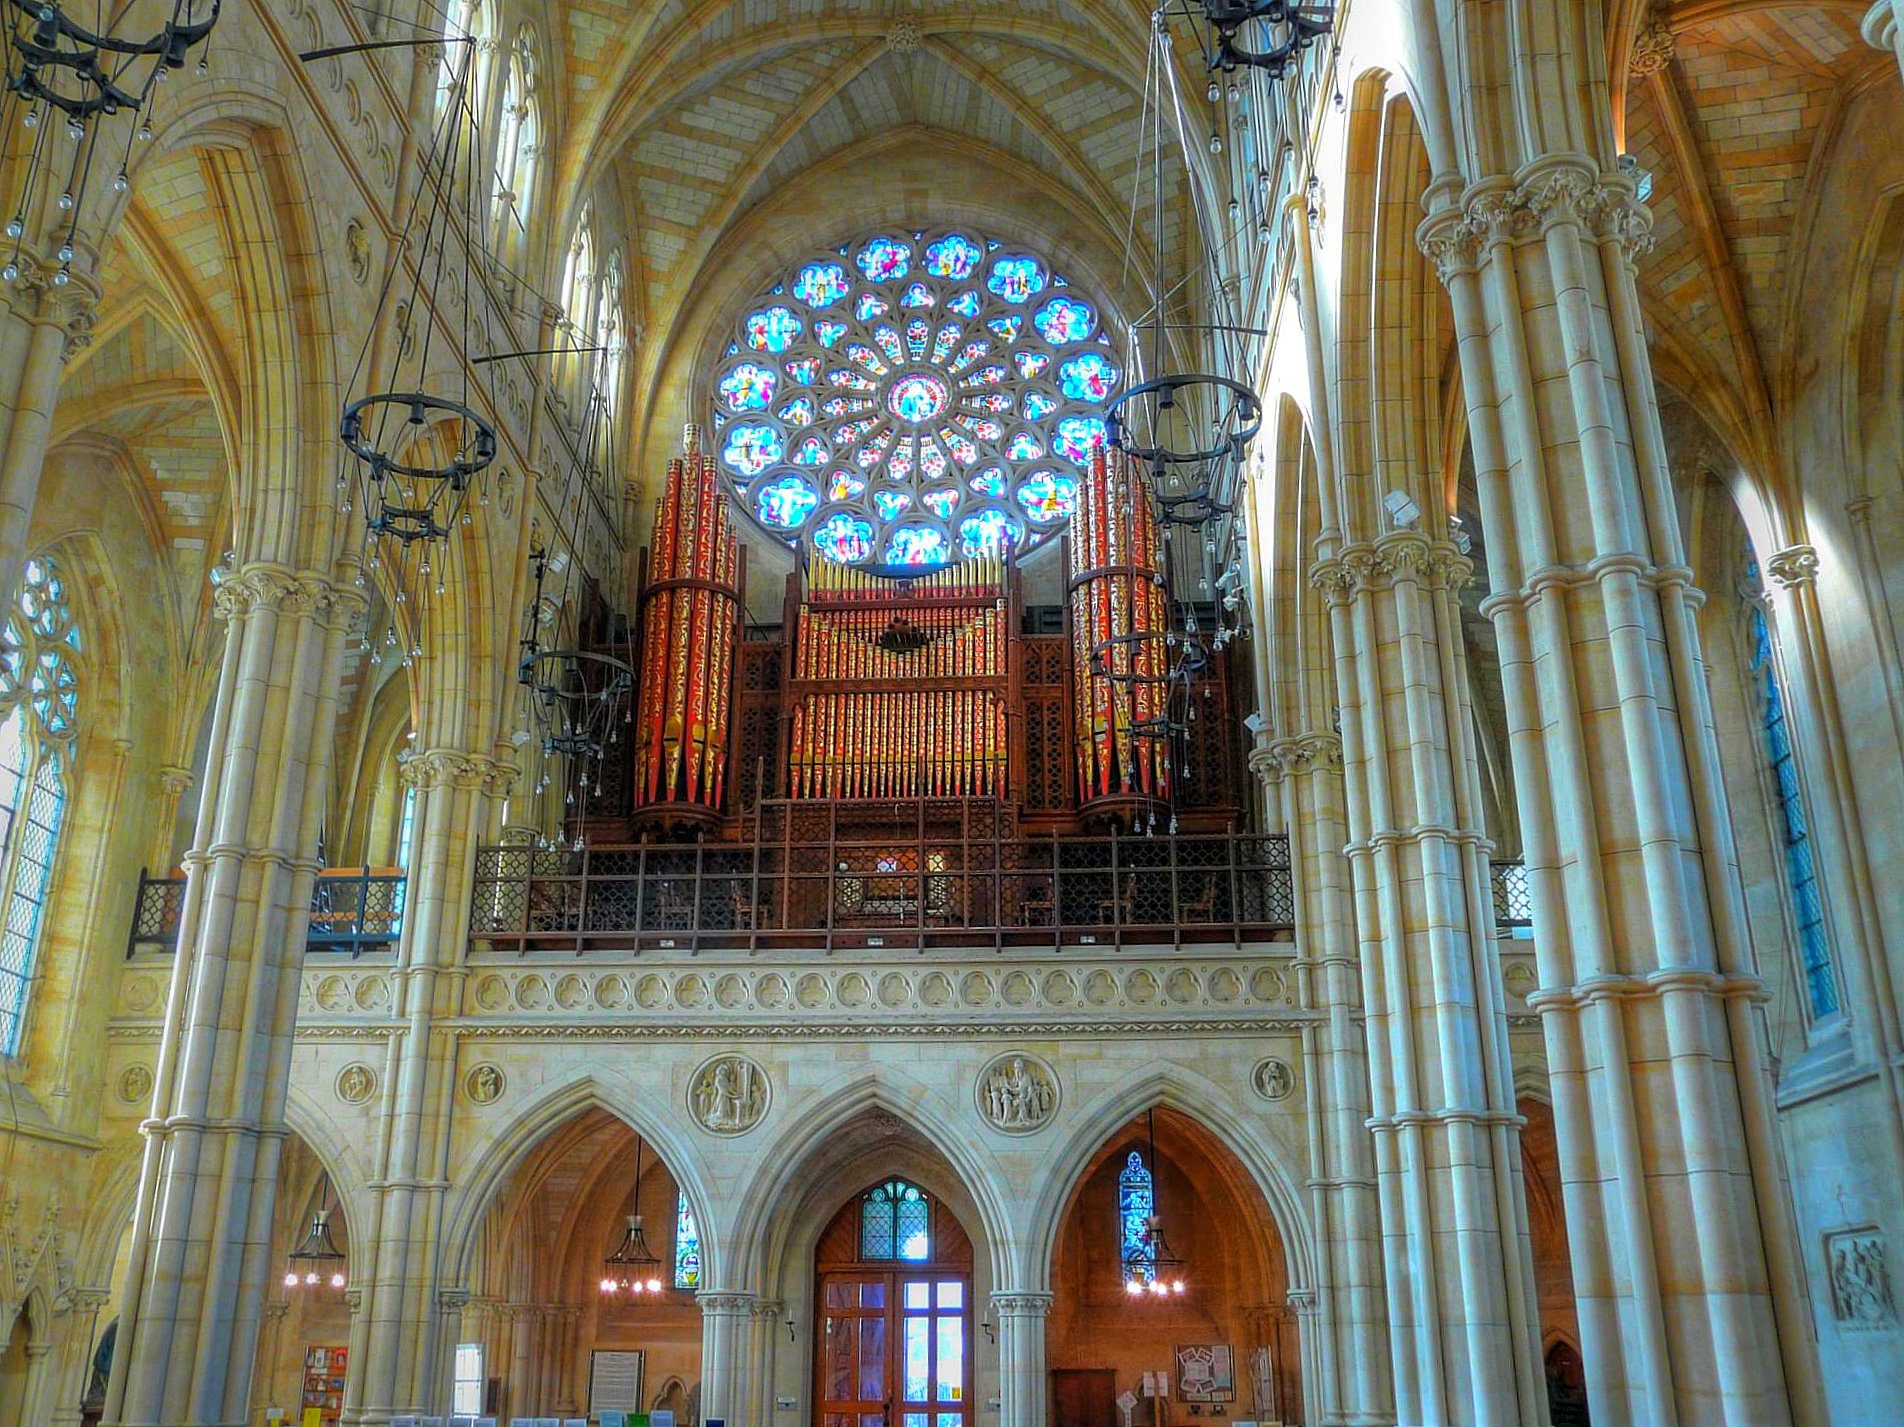 inside of an ornate cathedral with lights and stained glass windows